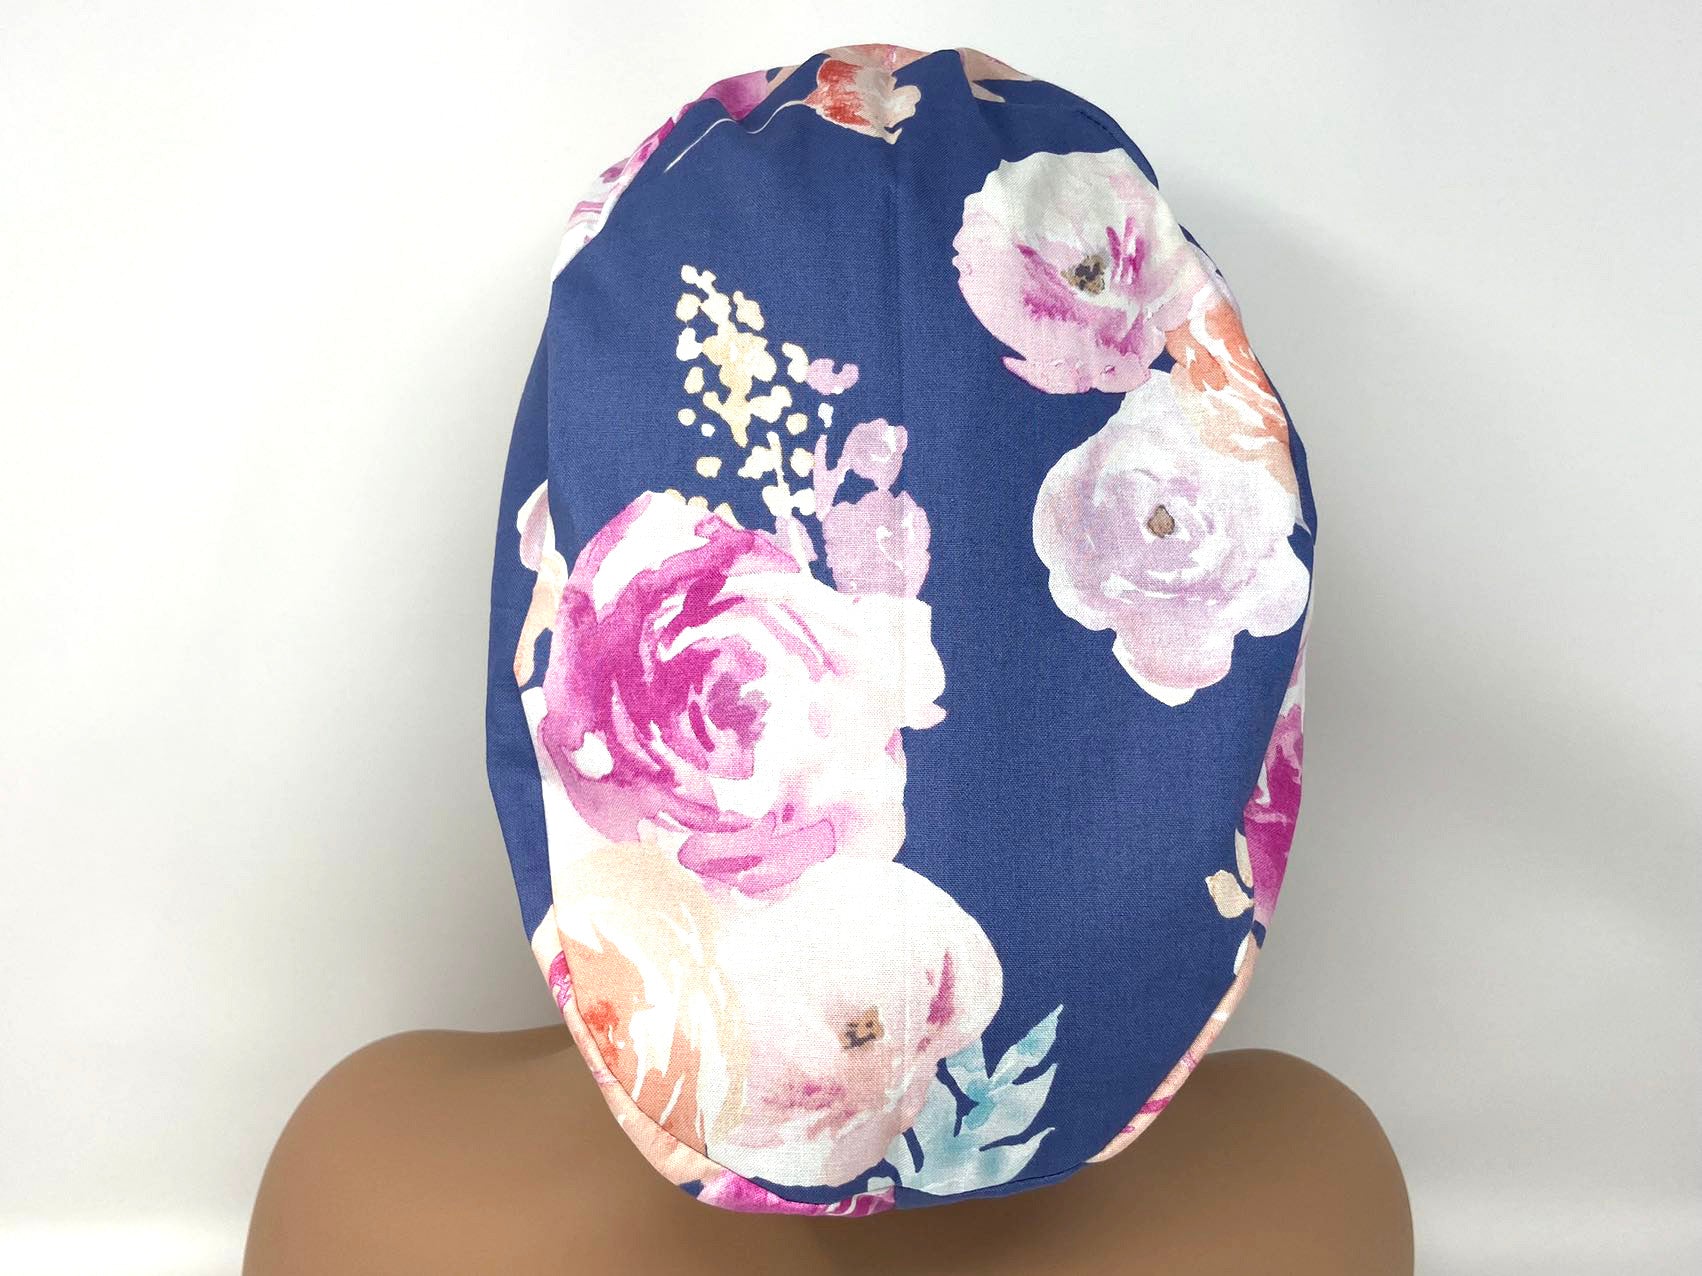 Large Roses in Watercolor on Steel Blue - Ponytail